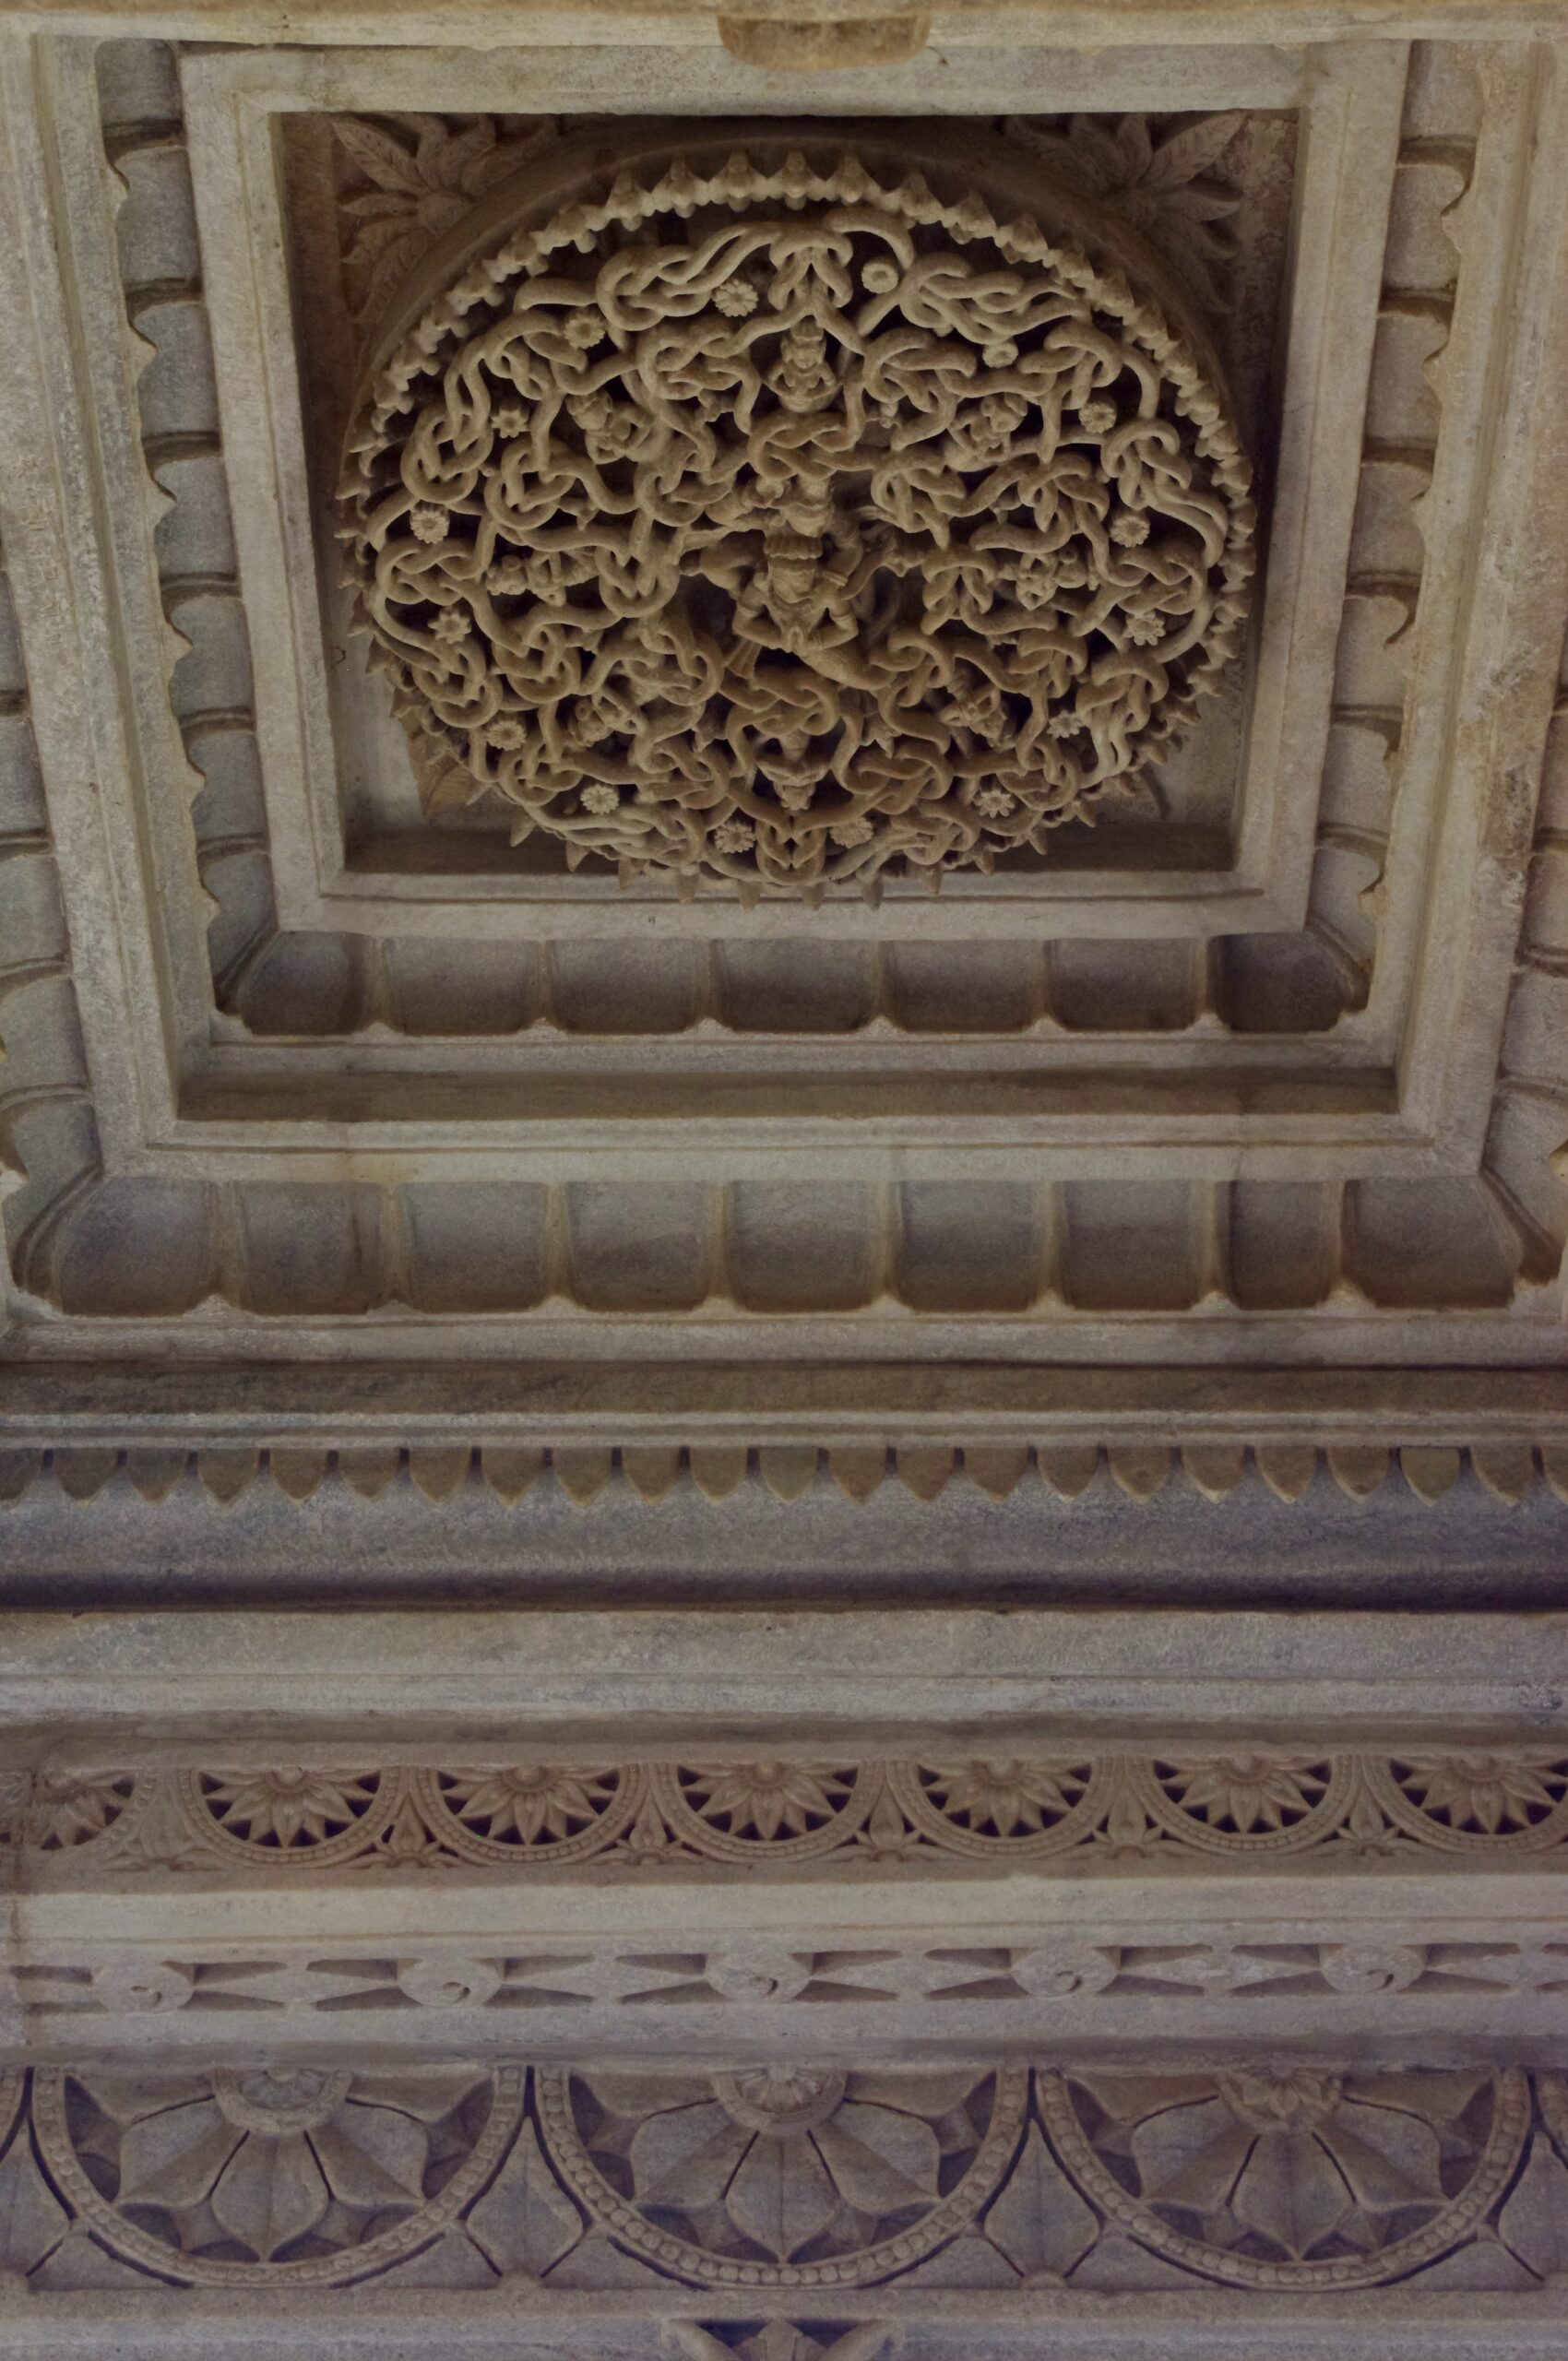 An intricately carved stone ceiling in a historic building. The central circular pattern features detailed floral and geometric designs, surrounded by additional ornate carvings. The craftsmanship displays deep textures and symmetrical arrangements.